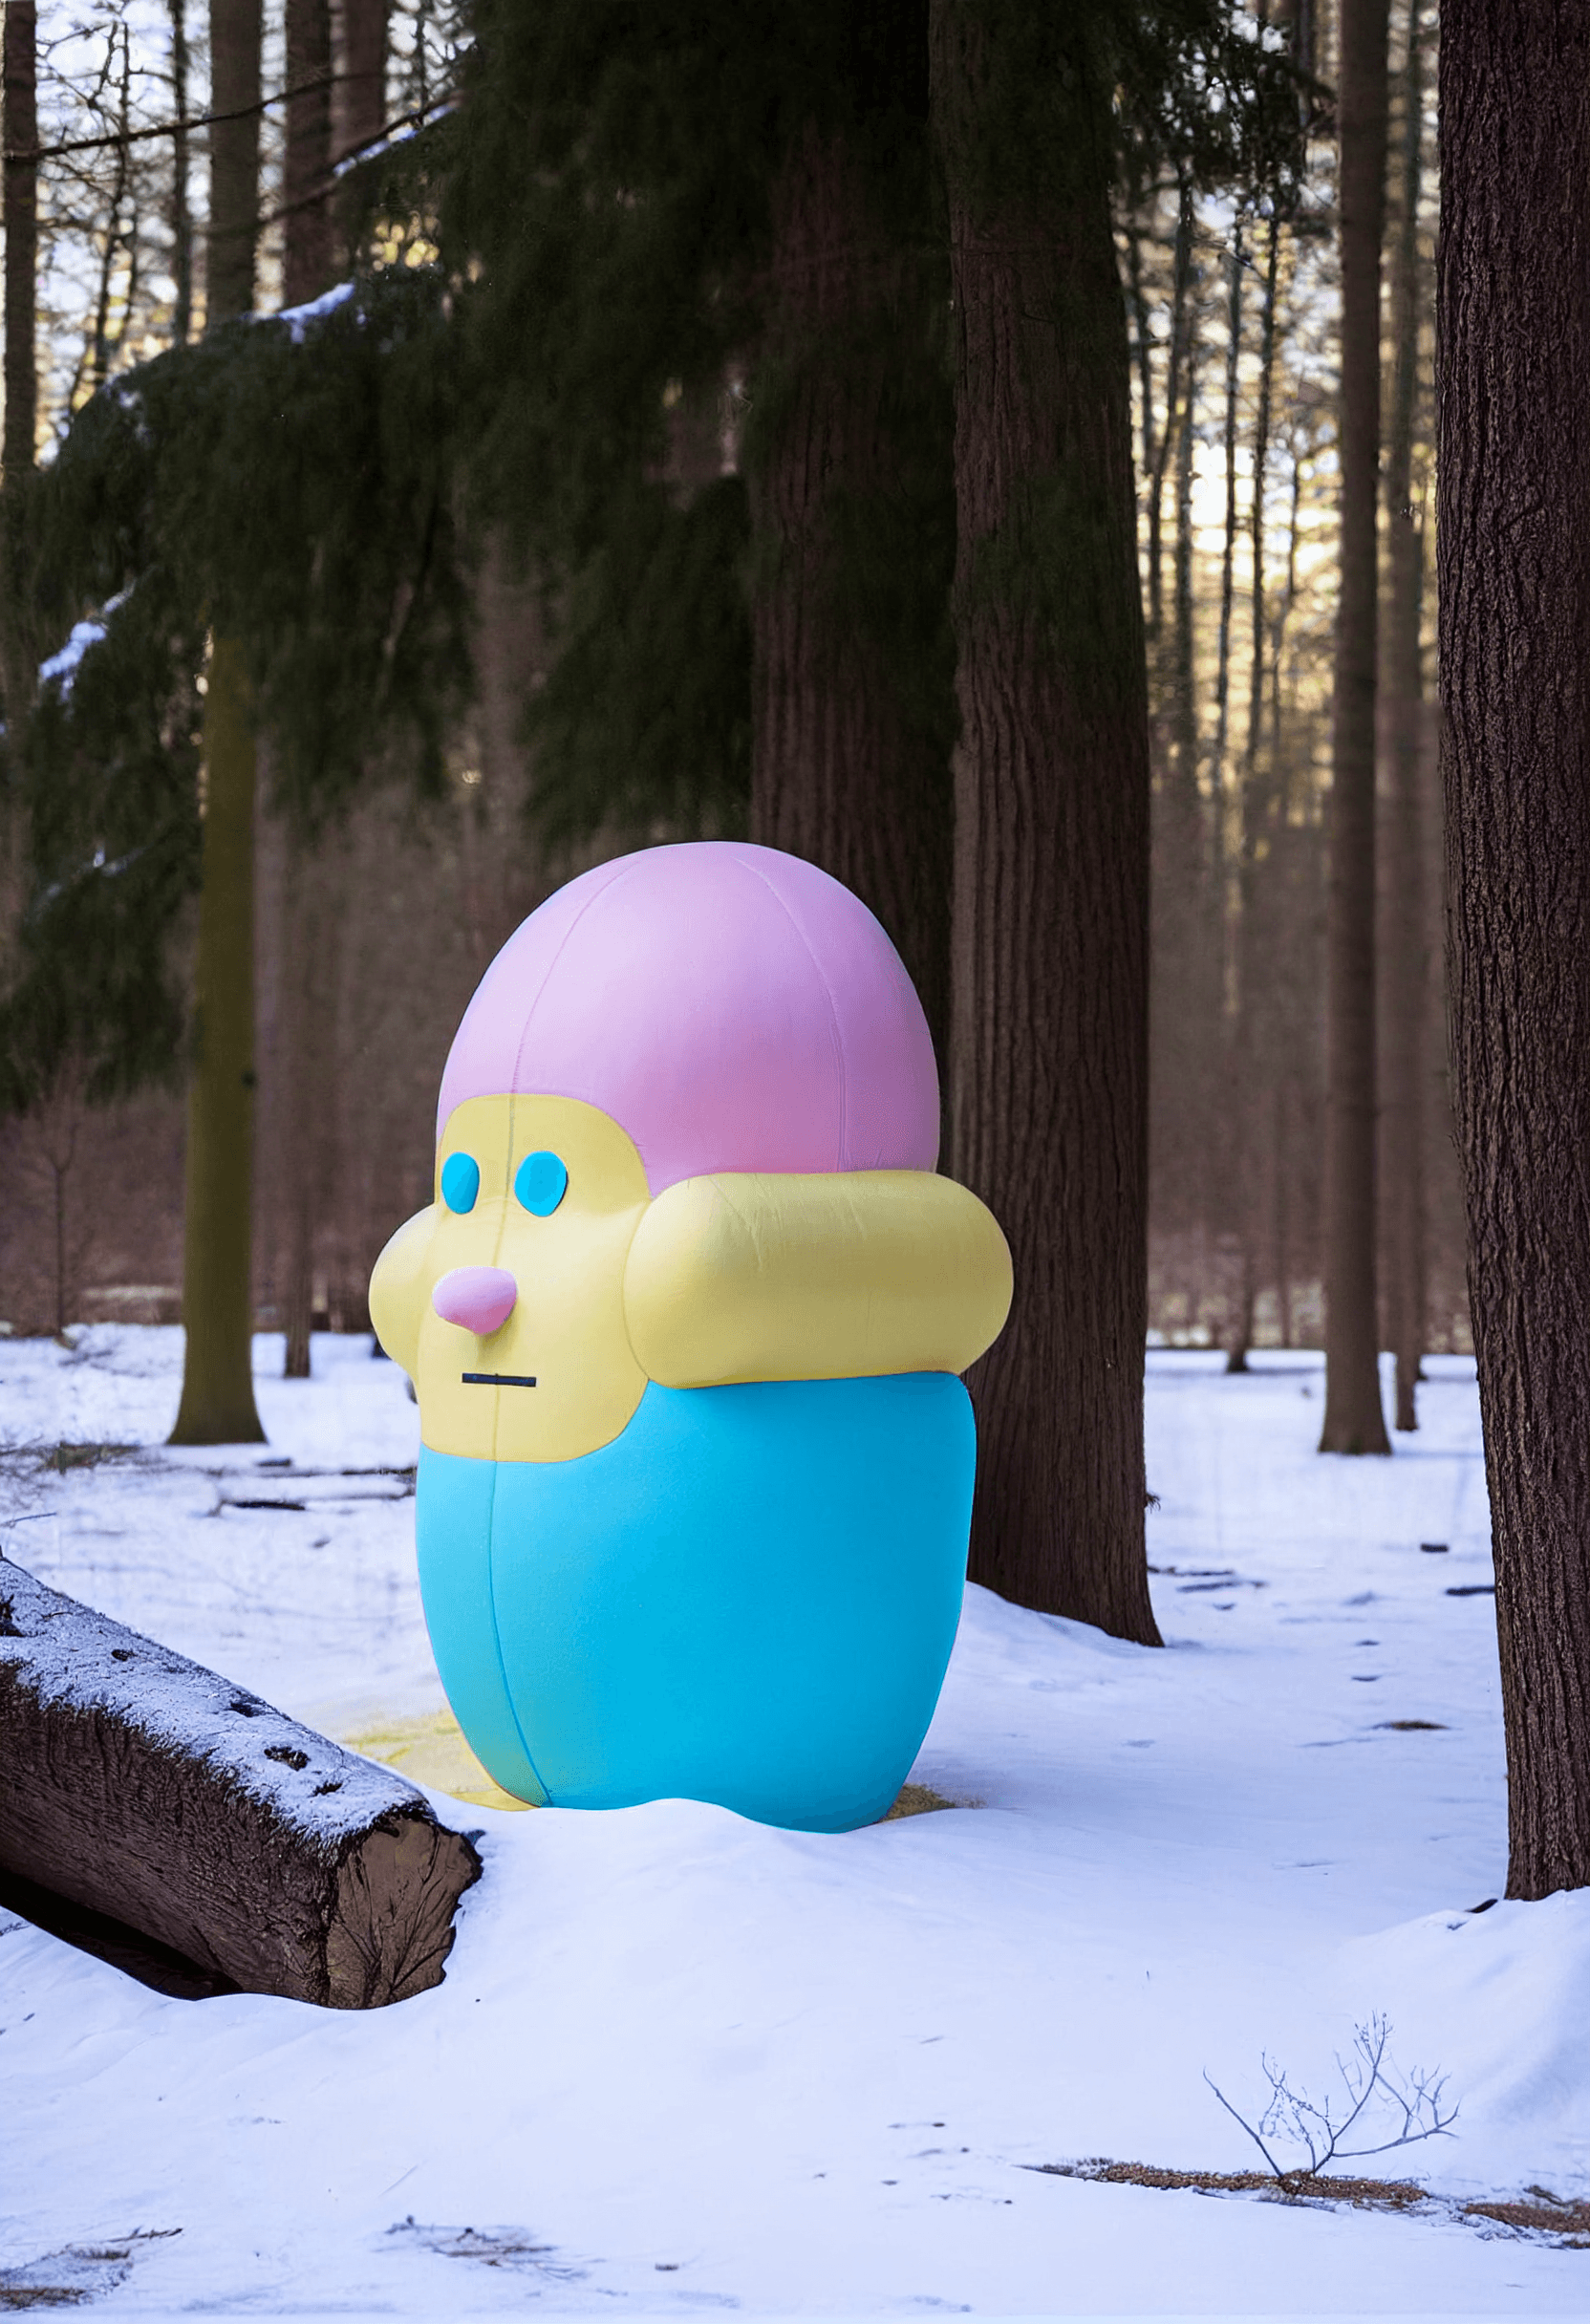 Forest Bounty: The Yellow Snow #2/30